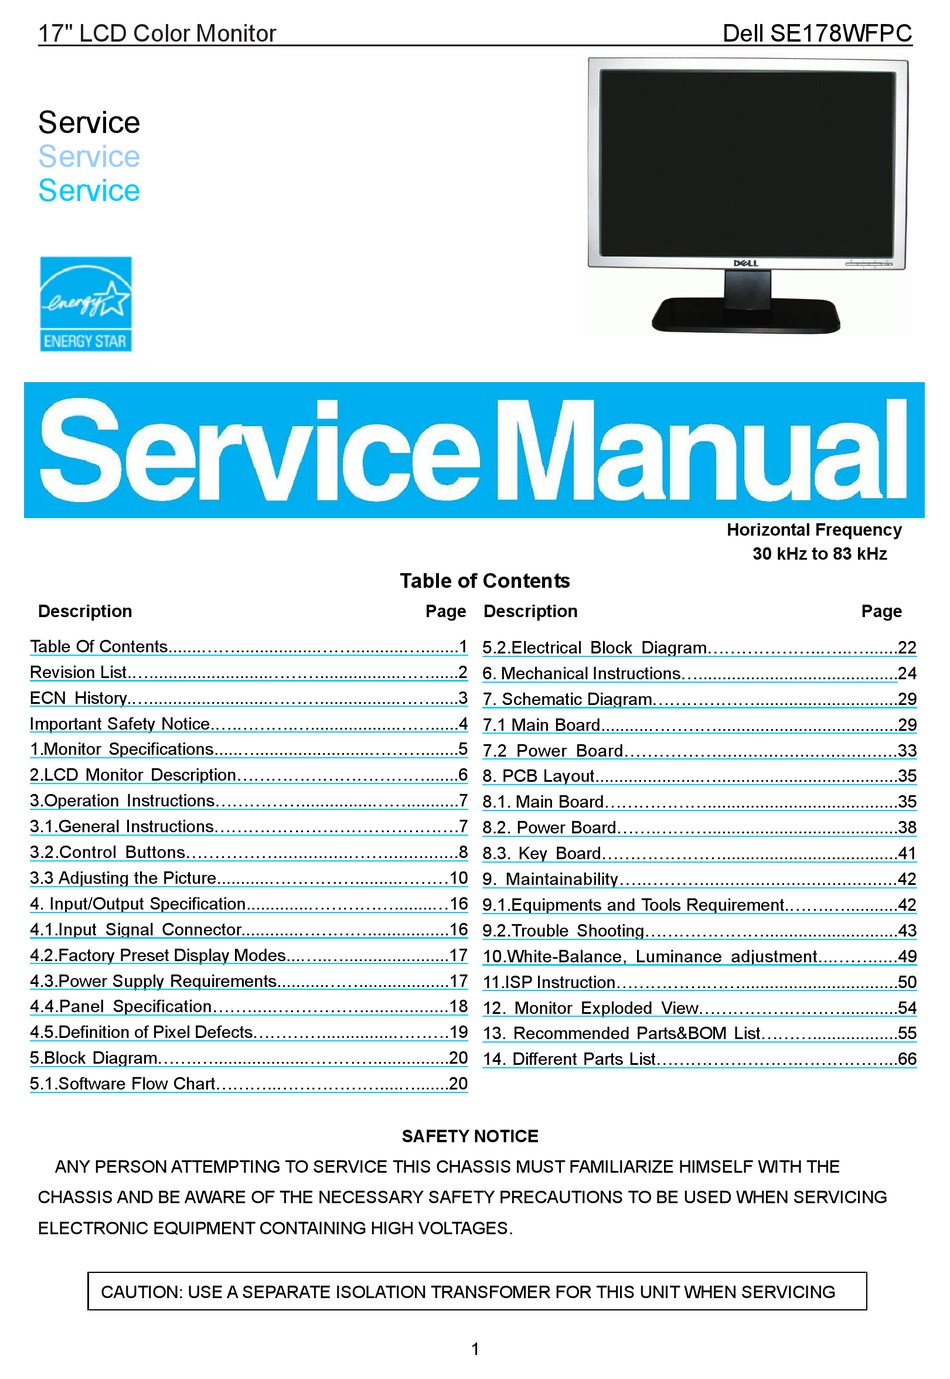 Monitor Specifications - Dell SE178WFPC Service Manual [Page 5] | ManualsLib